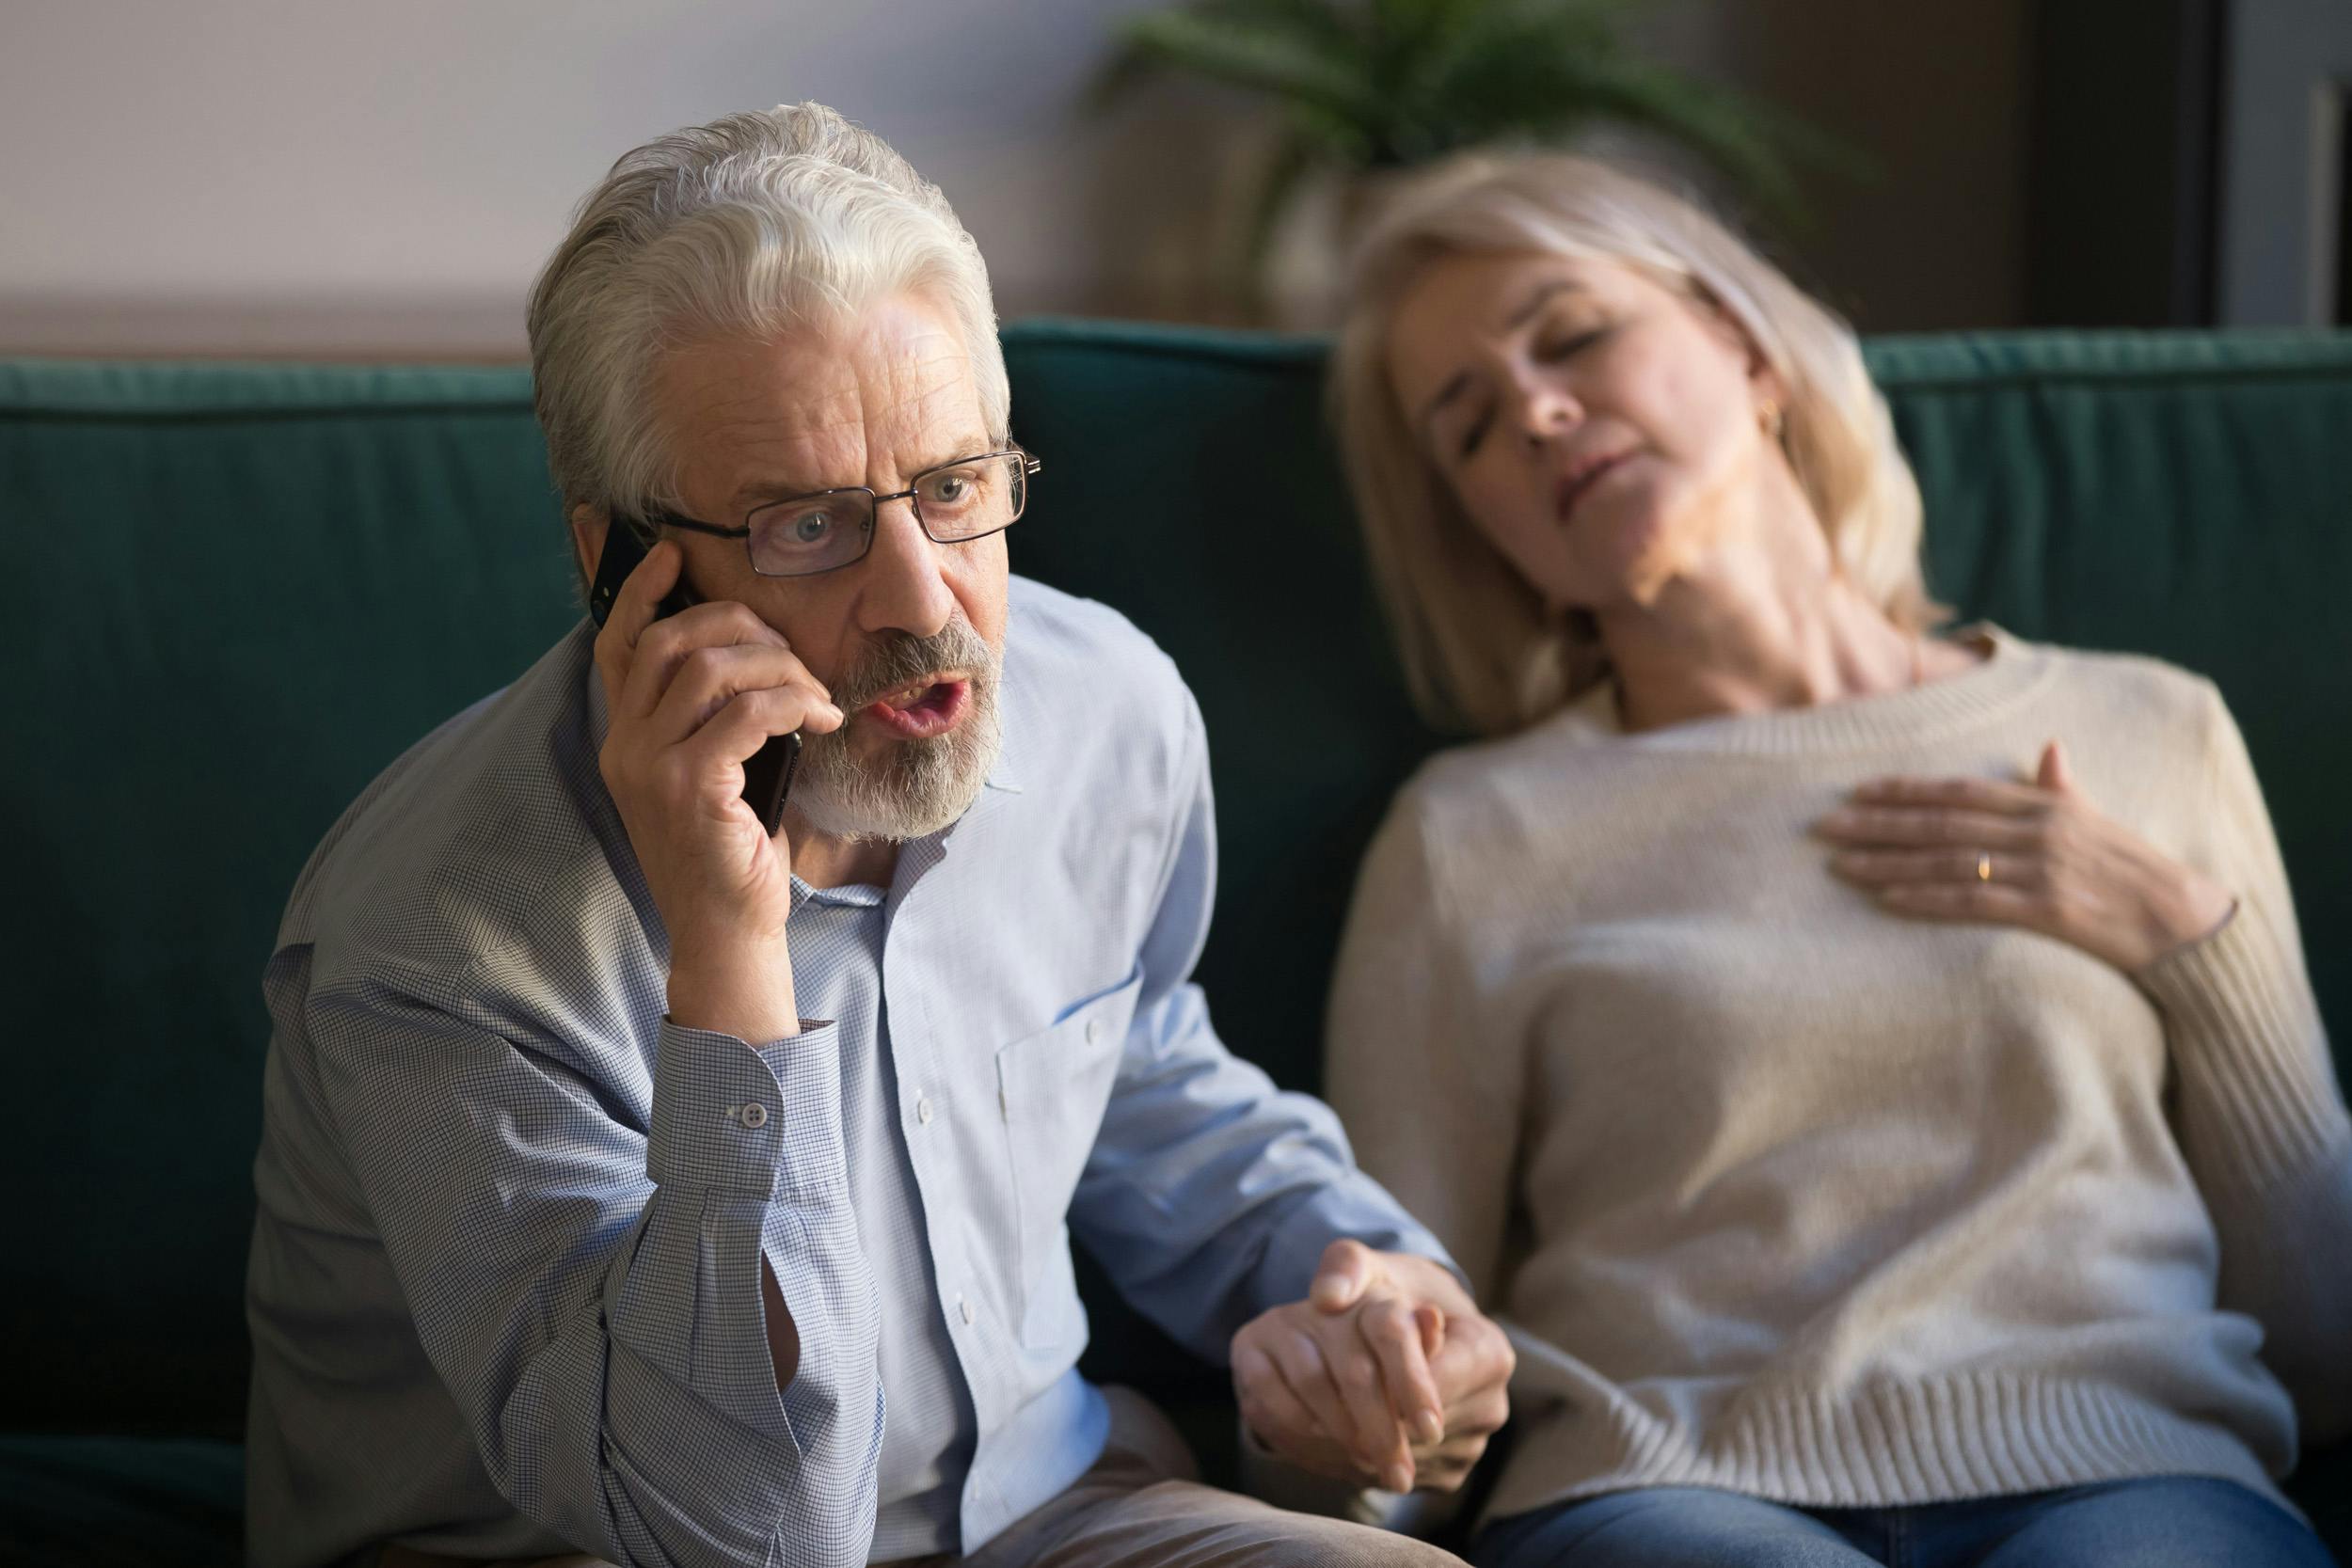 Worried elderly man talking on the phone while holding the hand of a sleeping or unwell-looking elderly woman.